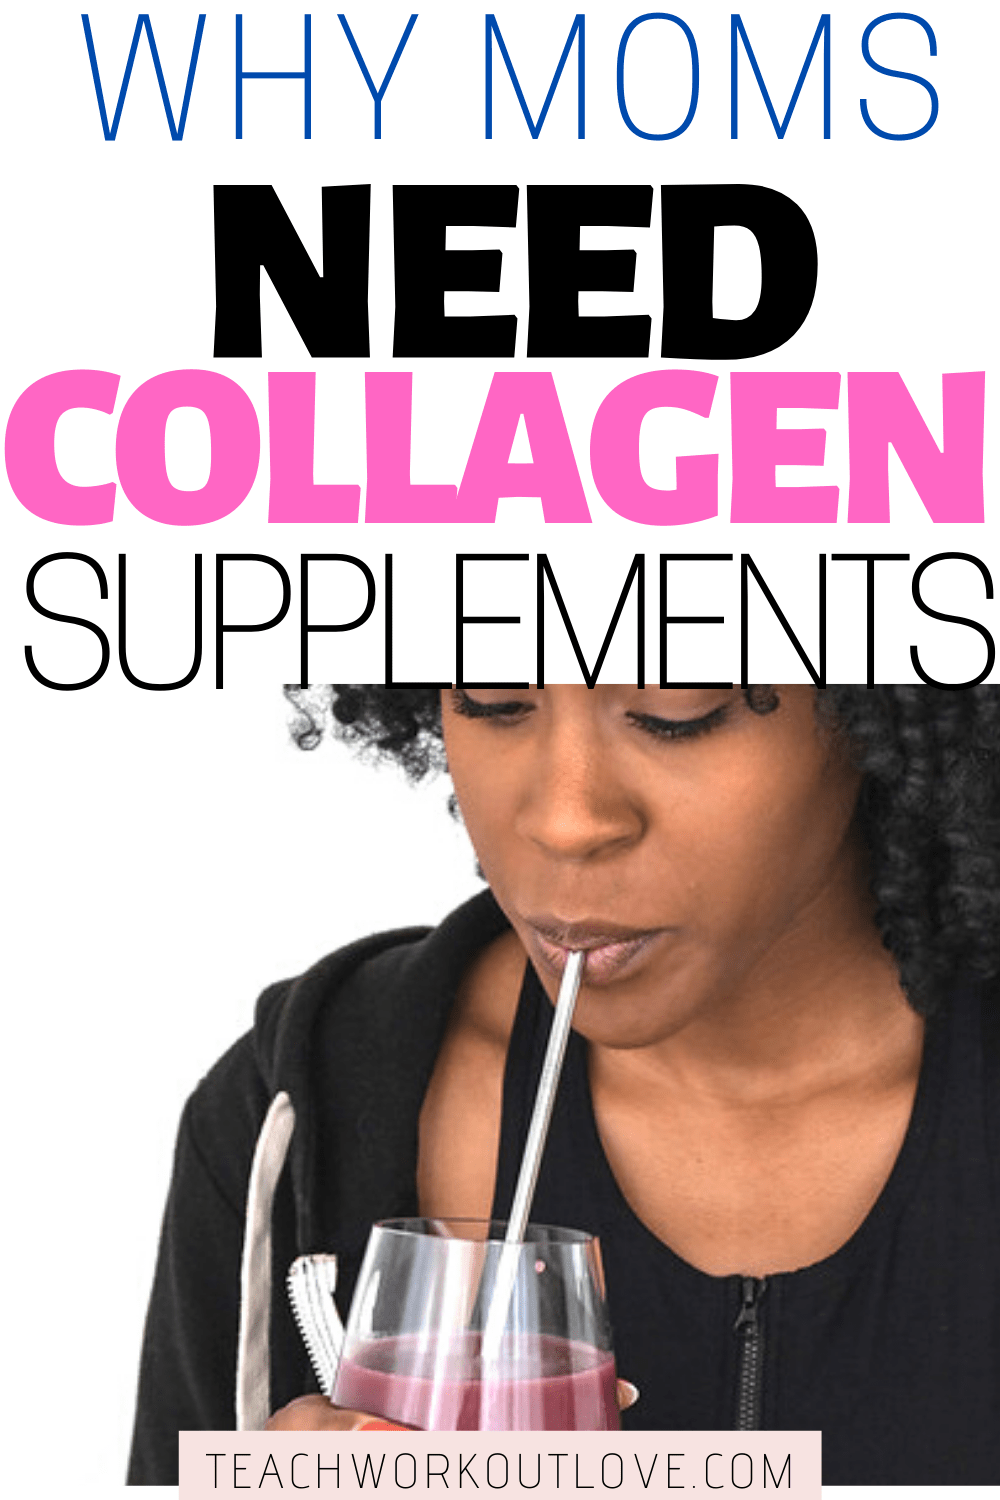 Collagen supplements have rapidly gained traction among health and beauty enthusiasts. Some claim that collagen is the ultimate anti-aging supplement. 